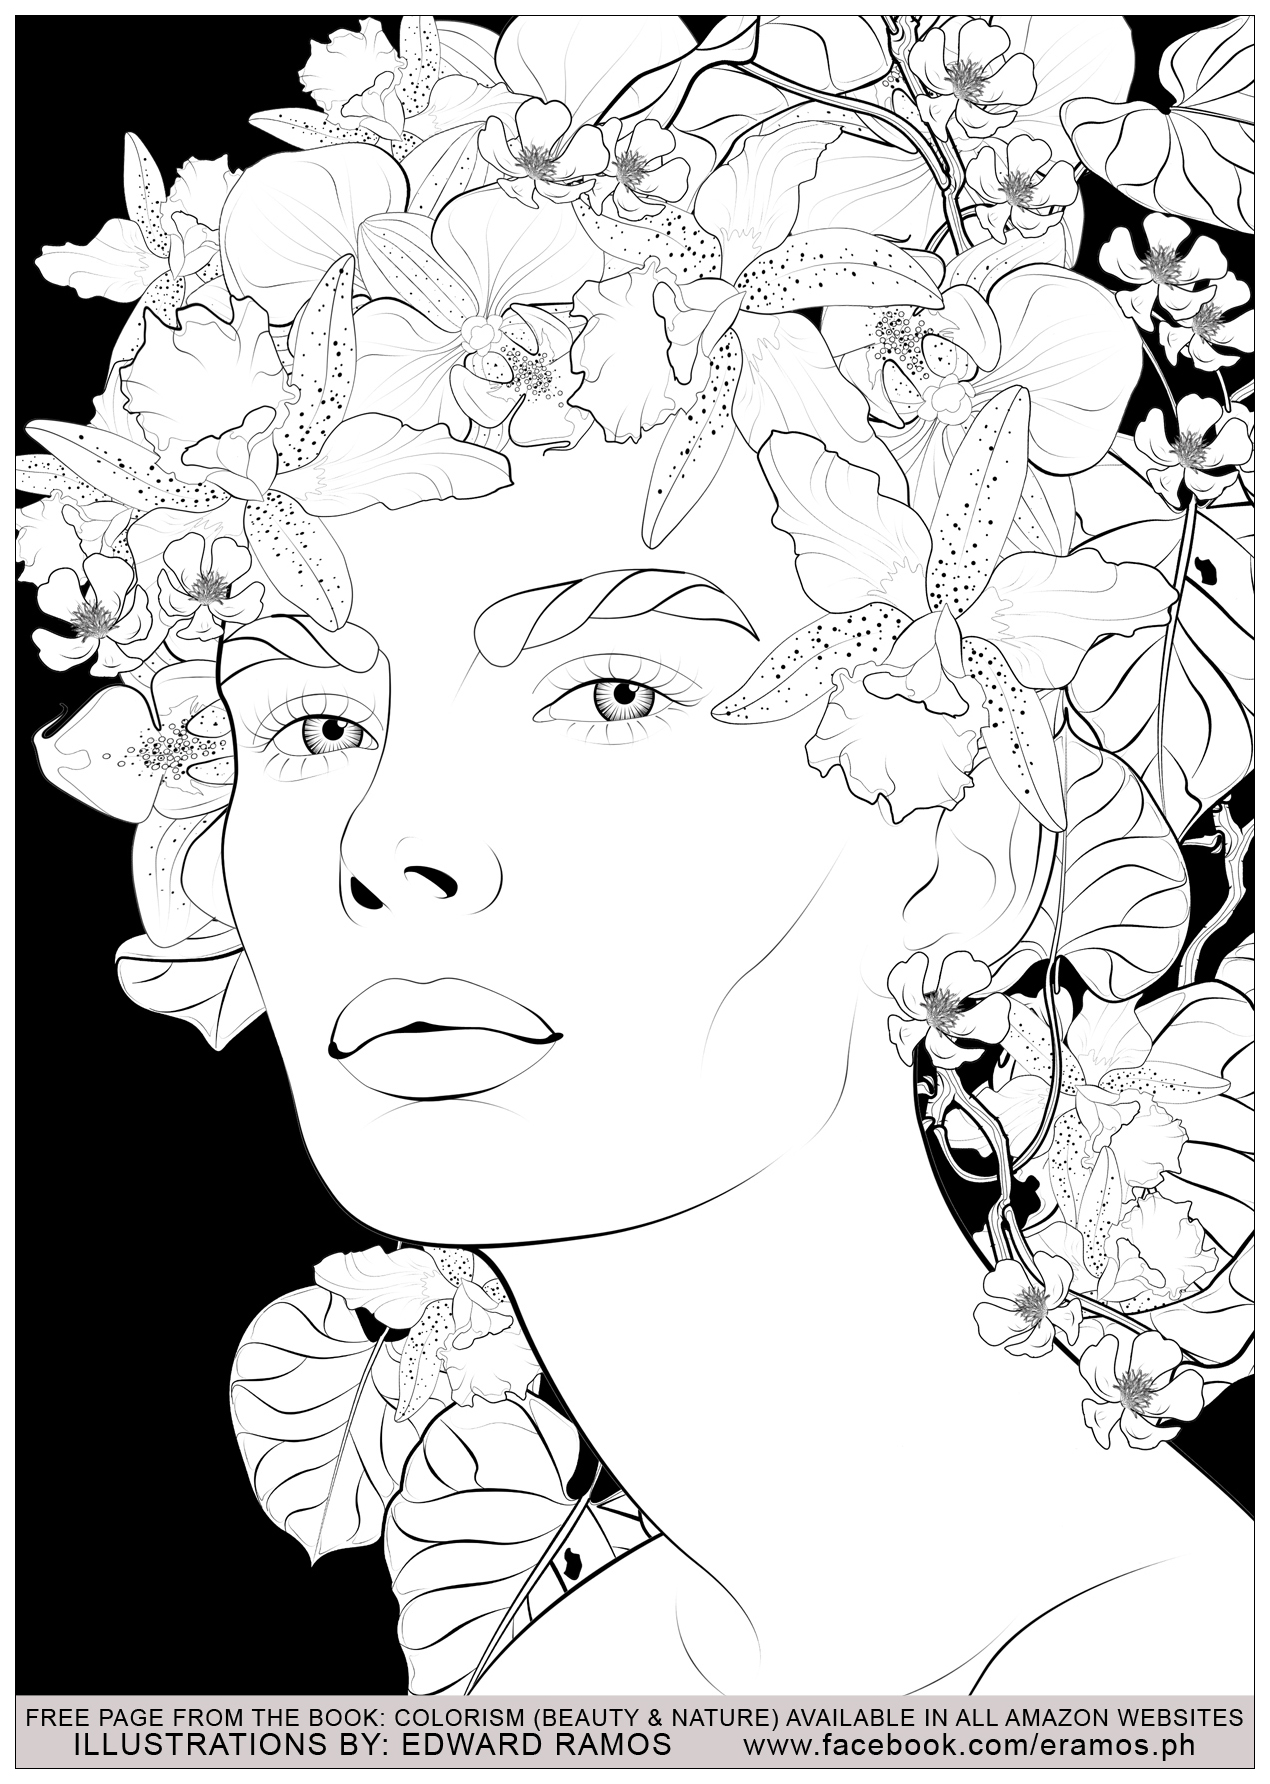 Illustration from the book Colorism - Beauty & Nature by Edward Ramos - 11, Artist : Edward Ramos